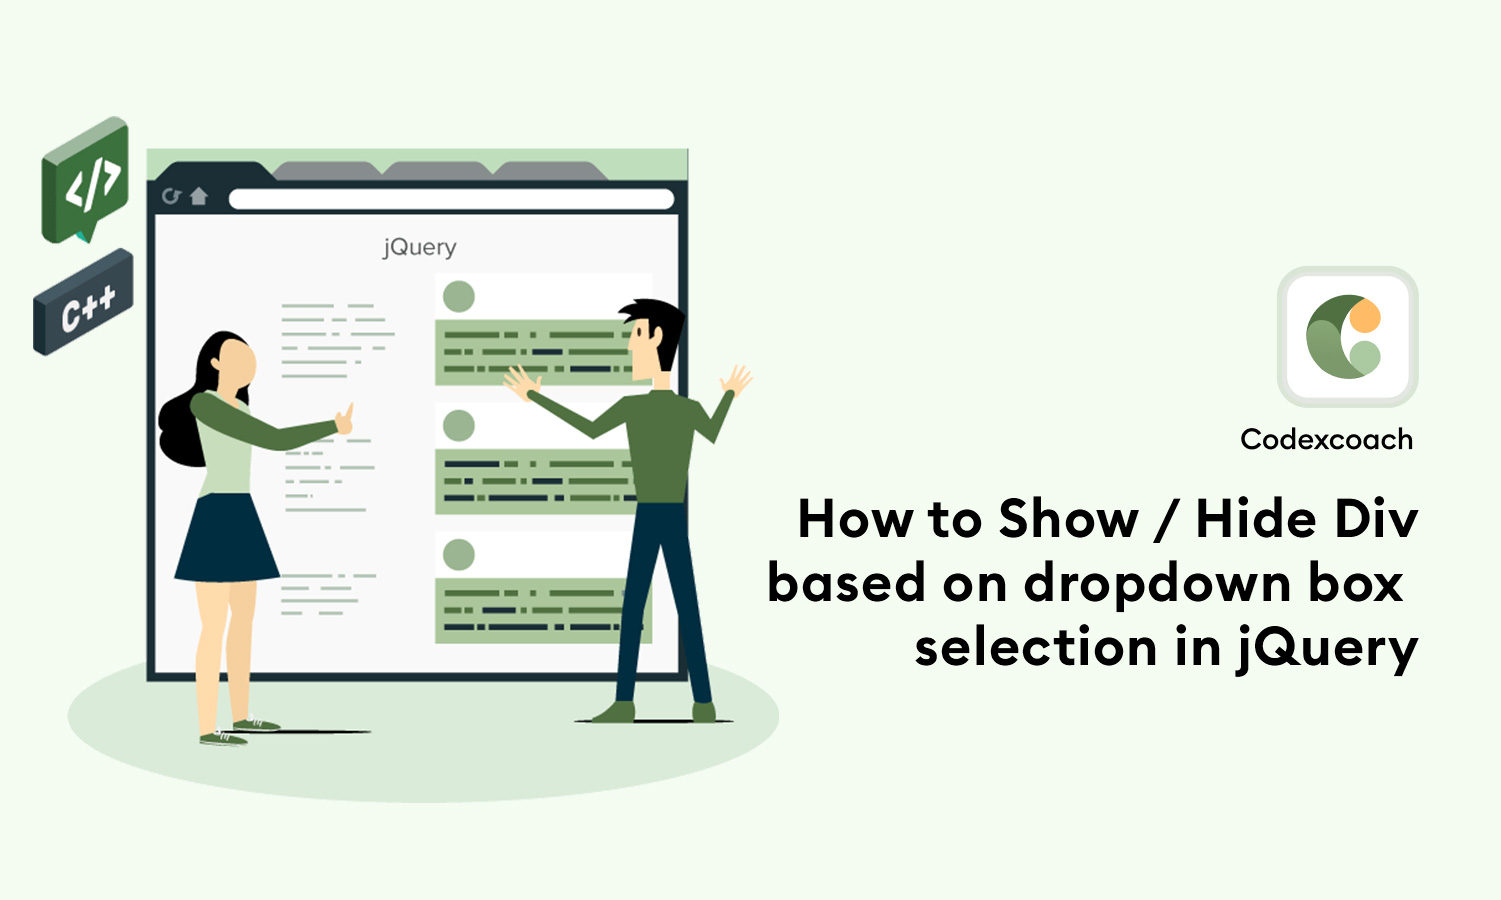 How-to-Show-Hide-Div-based-on-dropdown-box-selection-in-jQuery